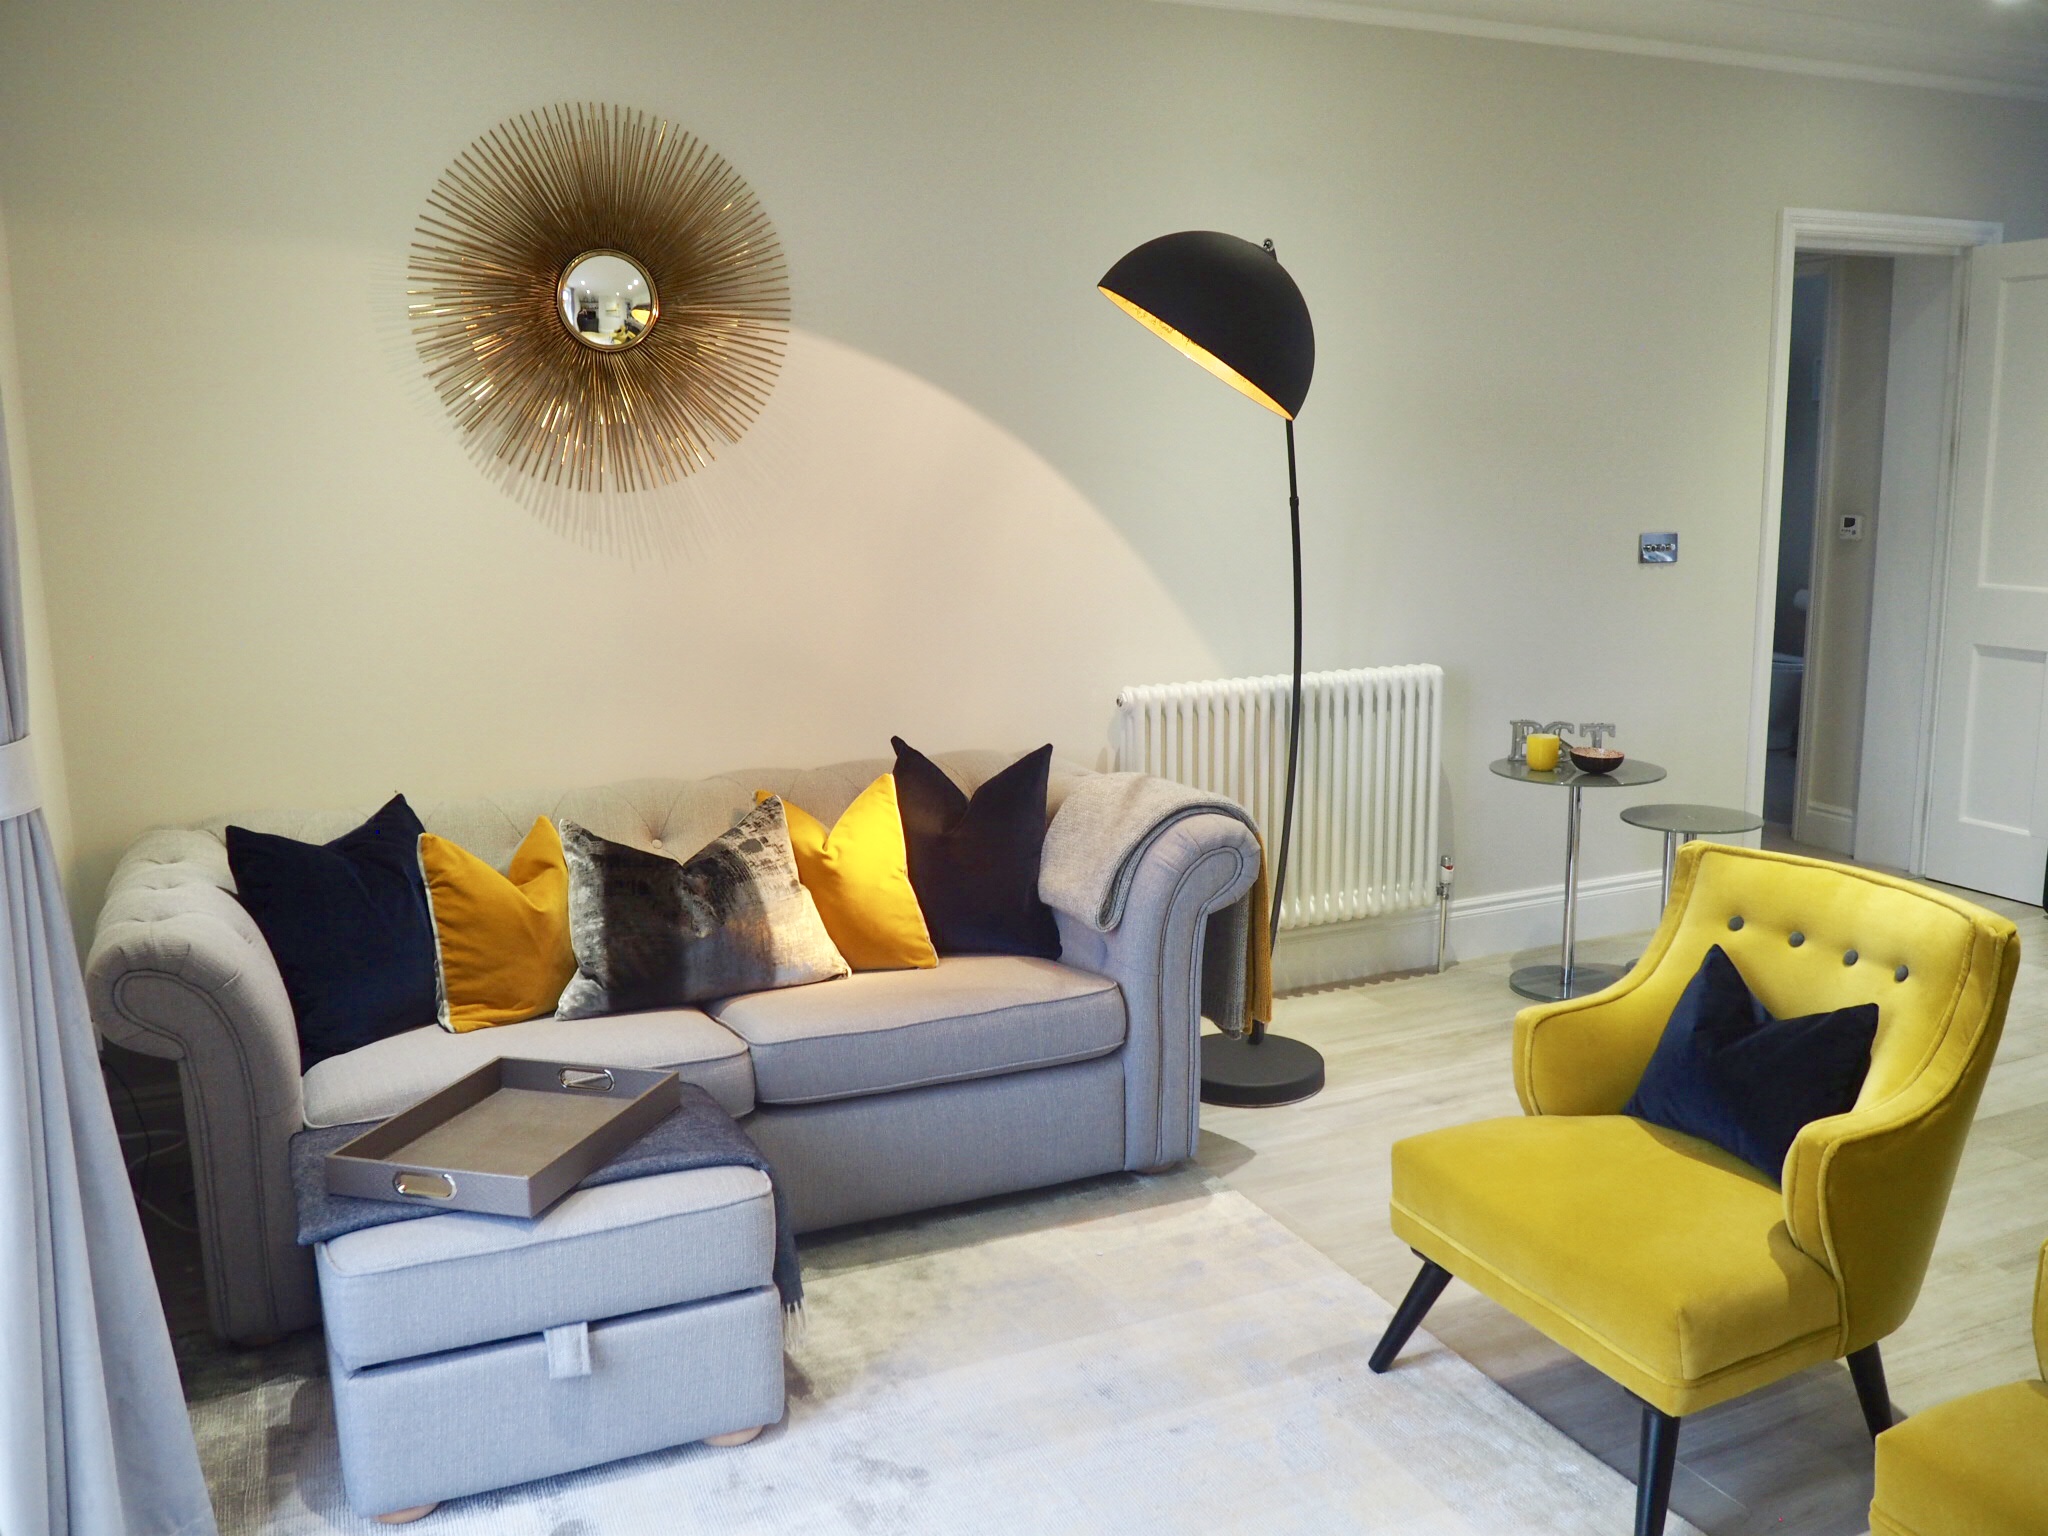 Living room with ombré grey and mustard rug, two mustard coloured chairs and cushions ranging through navy, ochre and grey, with a faux alligator tray.